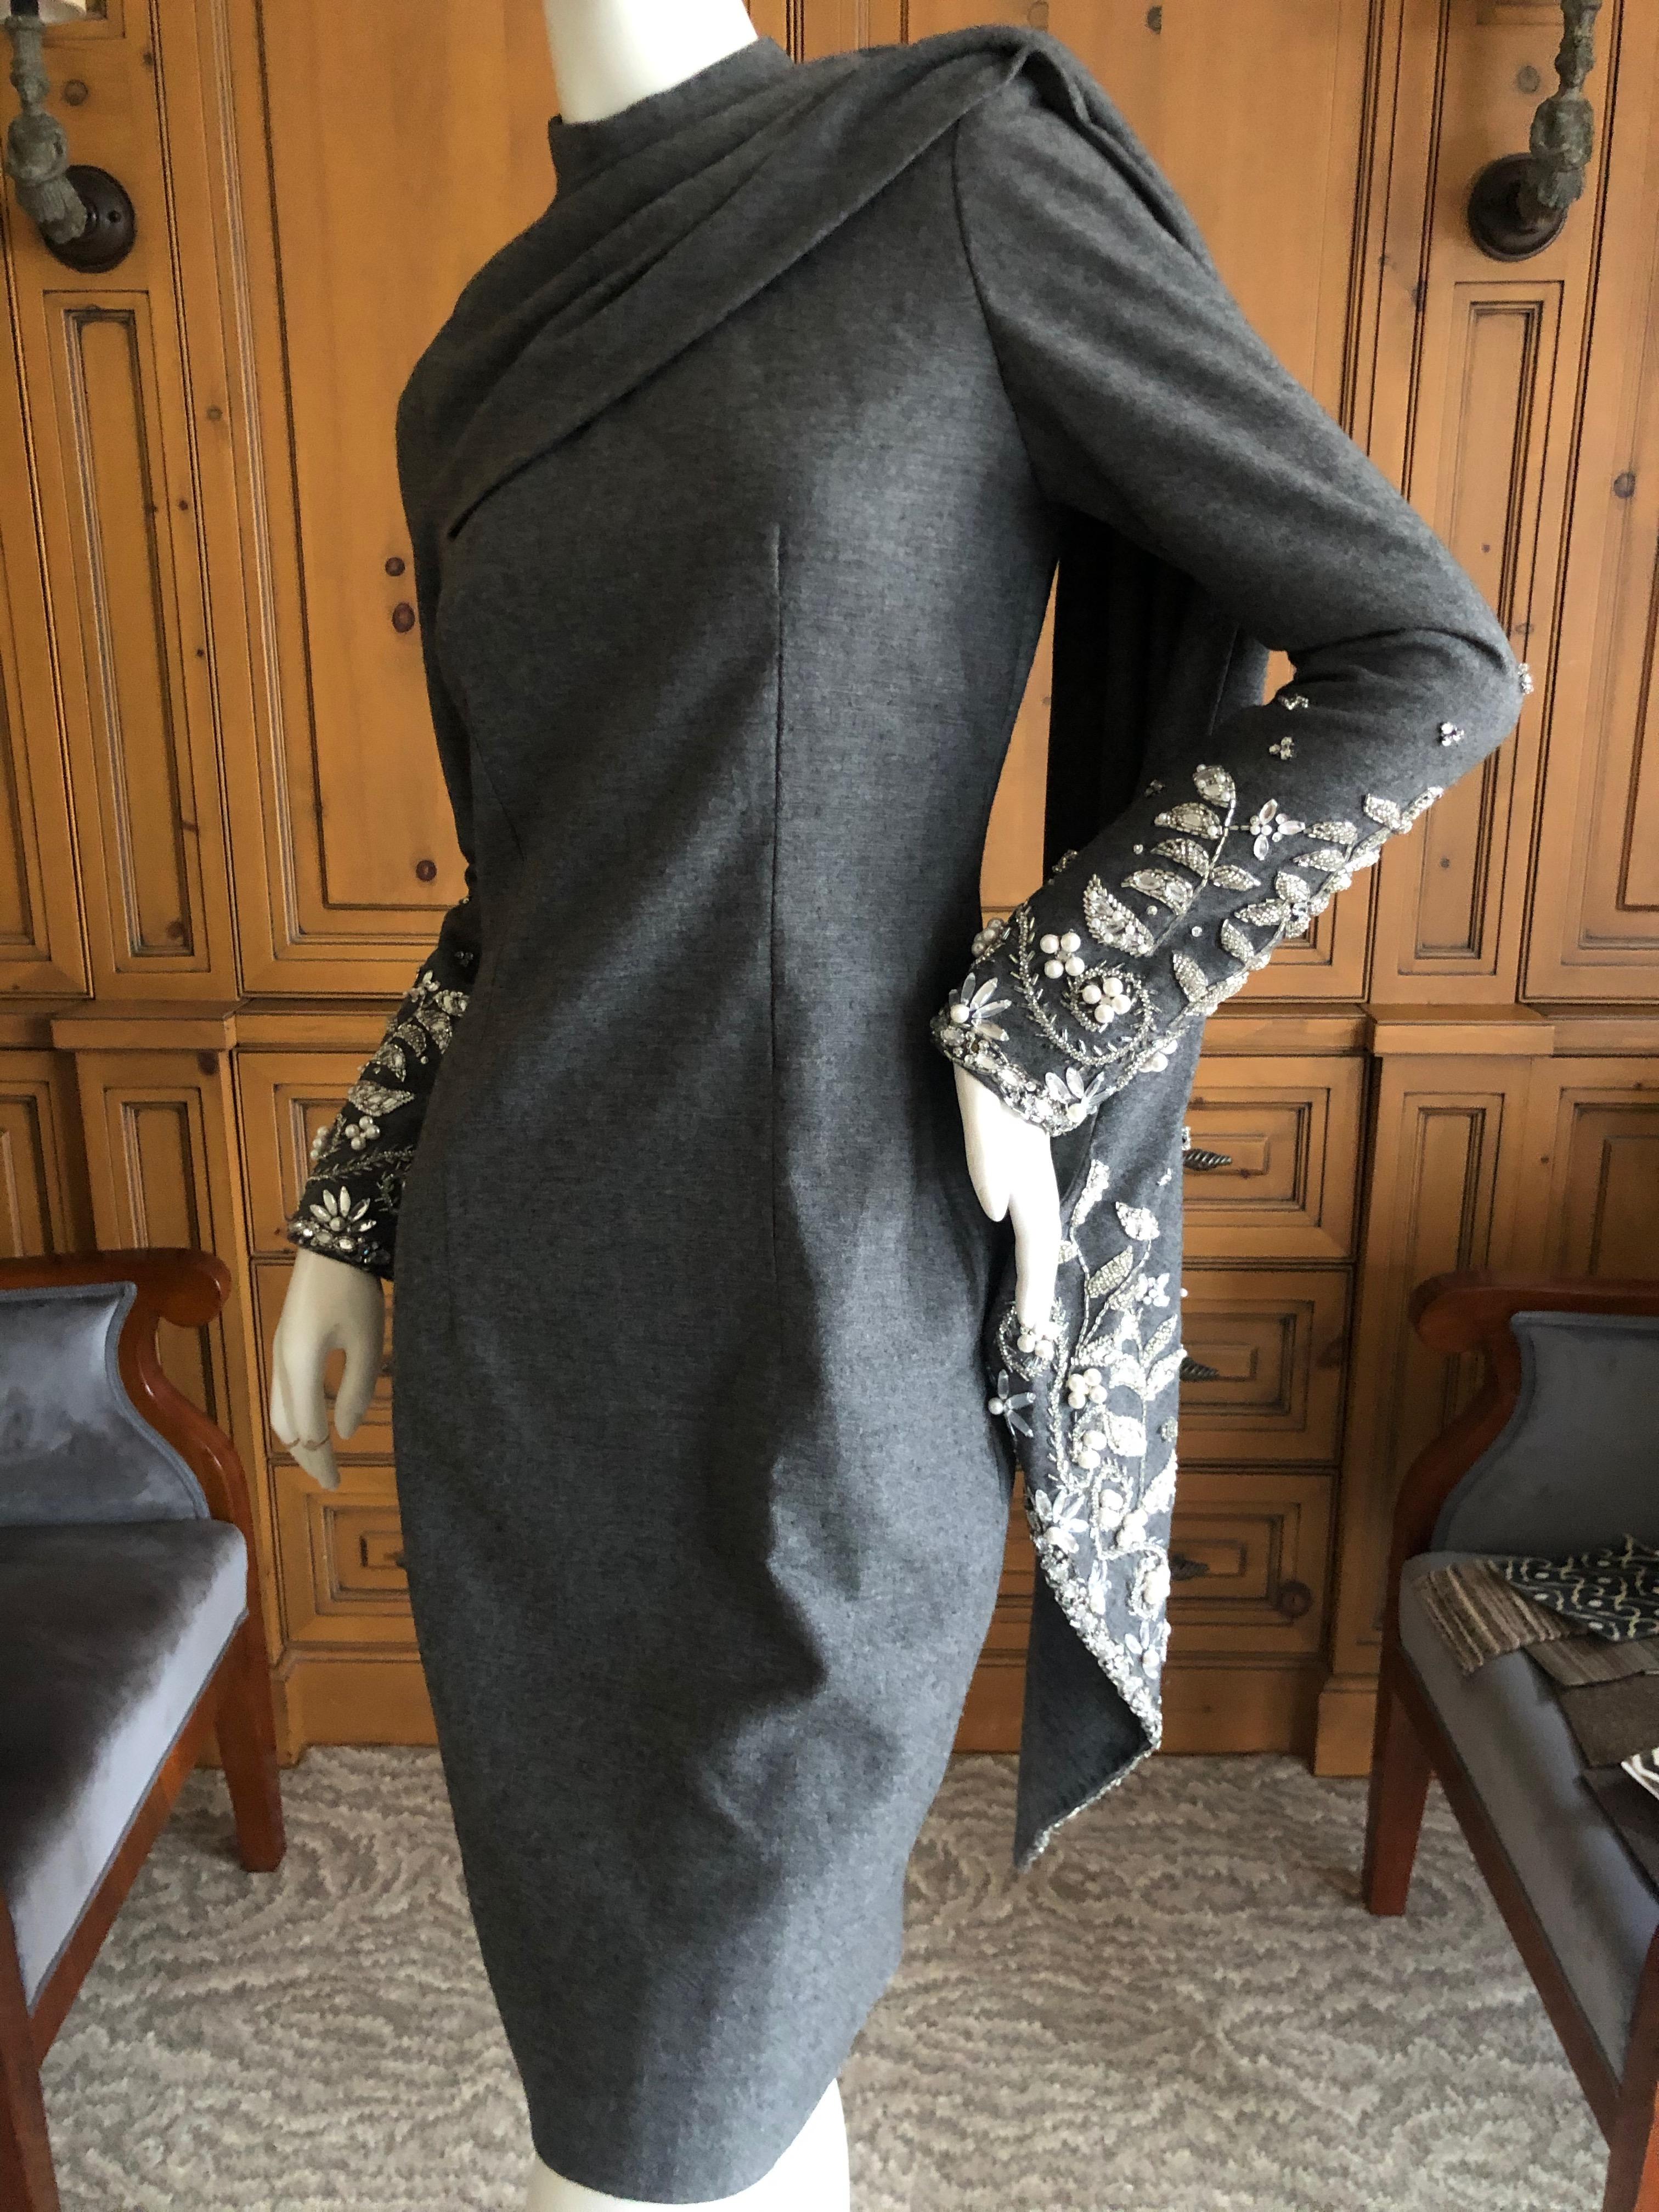 Bill Blass 1980's Gray Cocktail Dress with Crystal & Pearl Embellished Attached Scarf.
Gray wool jersey dress with zipper back, embellished sleeves and attached scarf.
APpx size 6
Bust 35'
Waist 30